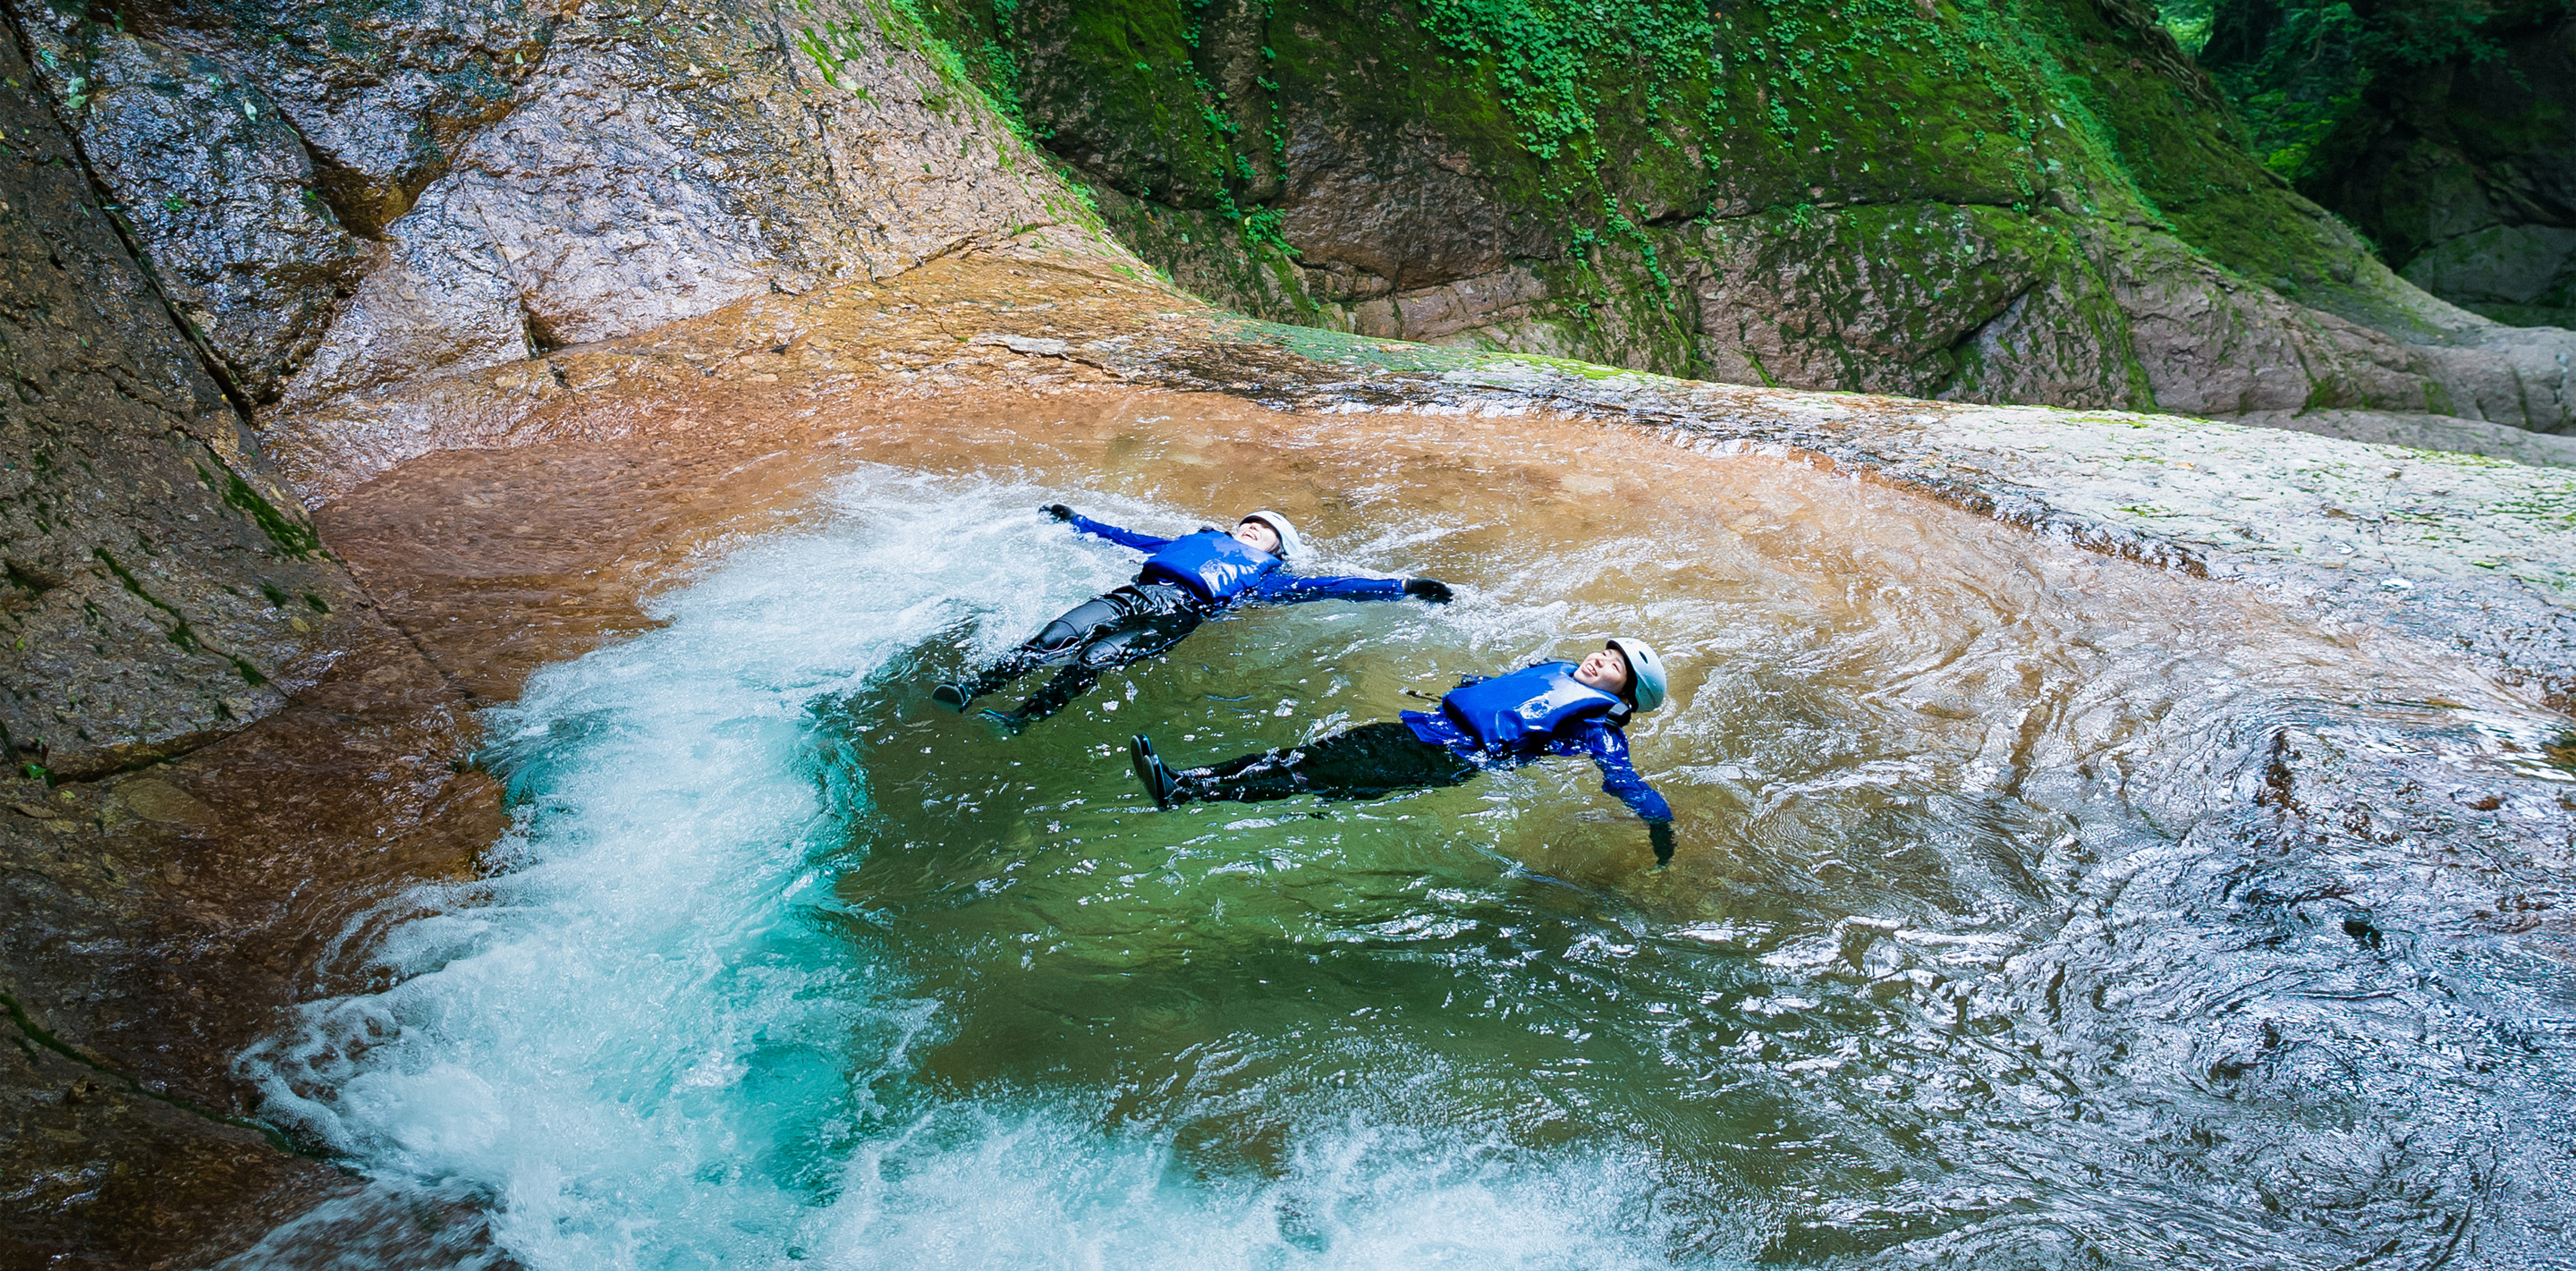 Enjoy water activities at this clear water stream
And natural water slides too!